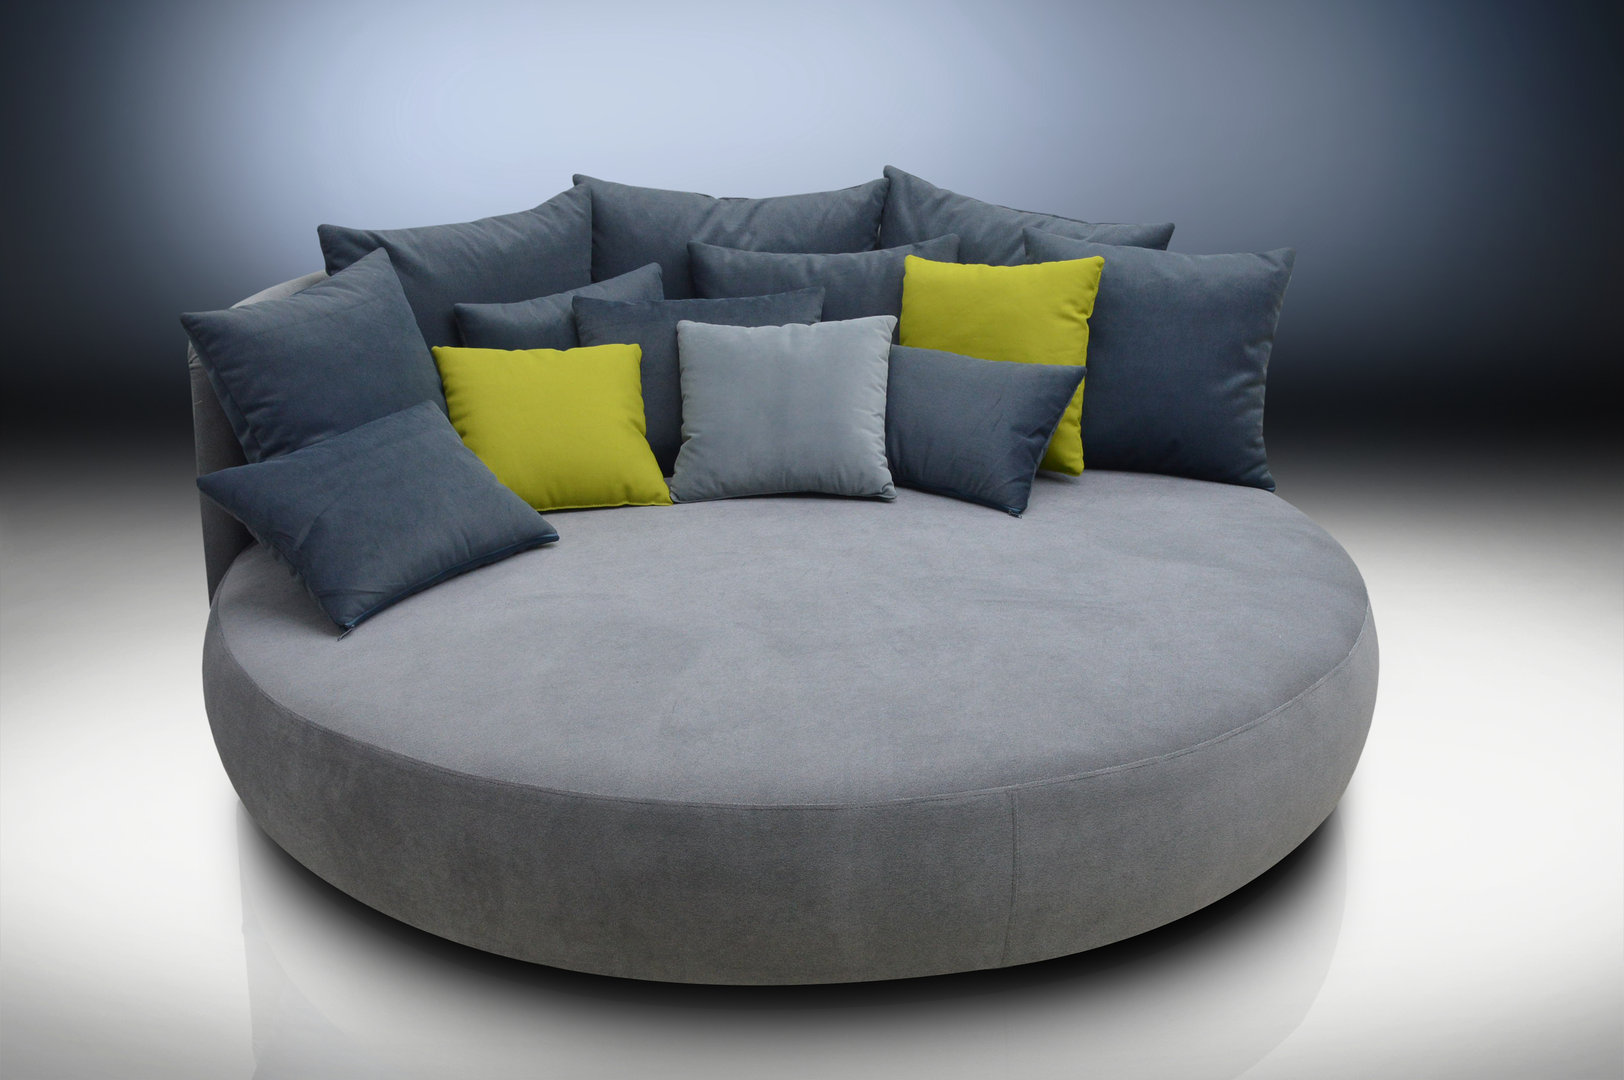 full size sofa round sofa: amazing round couch for sofa design ideas with awesome XWWCSEQ